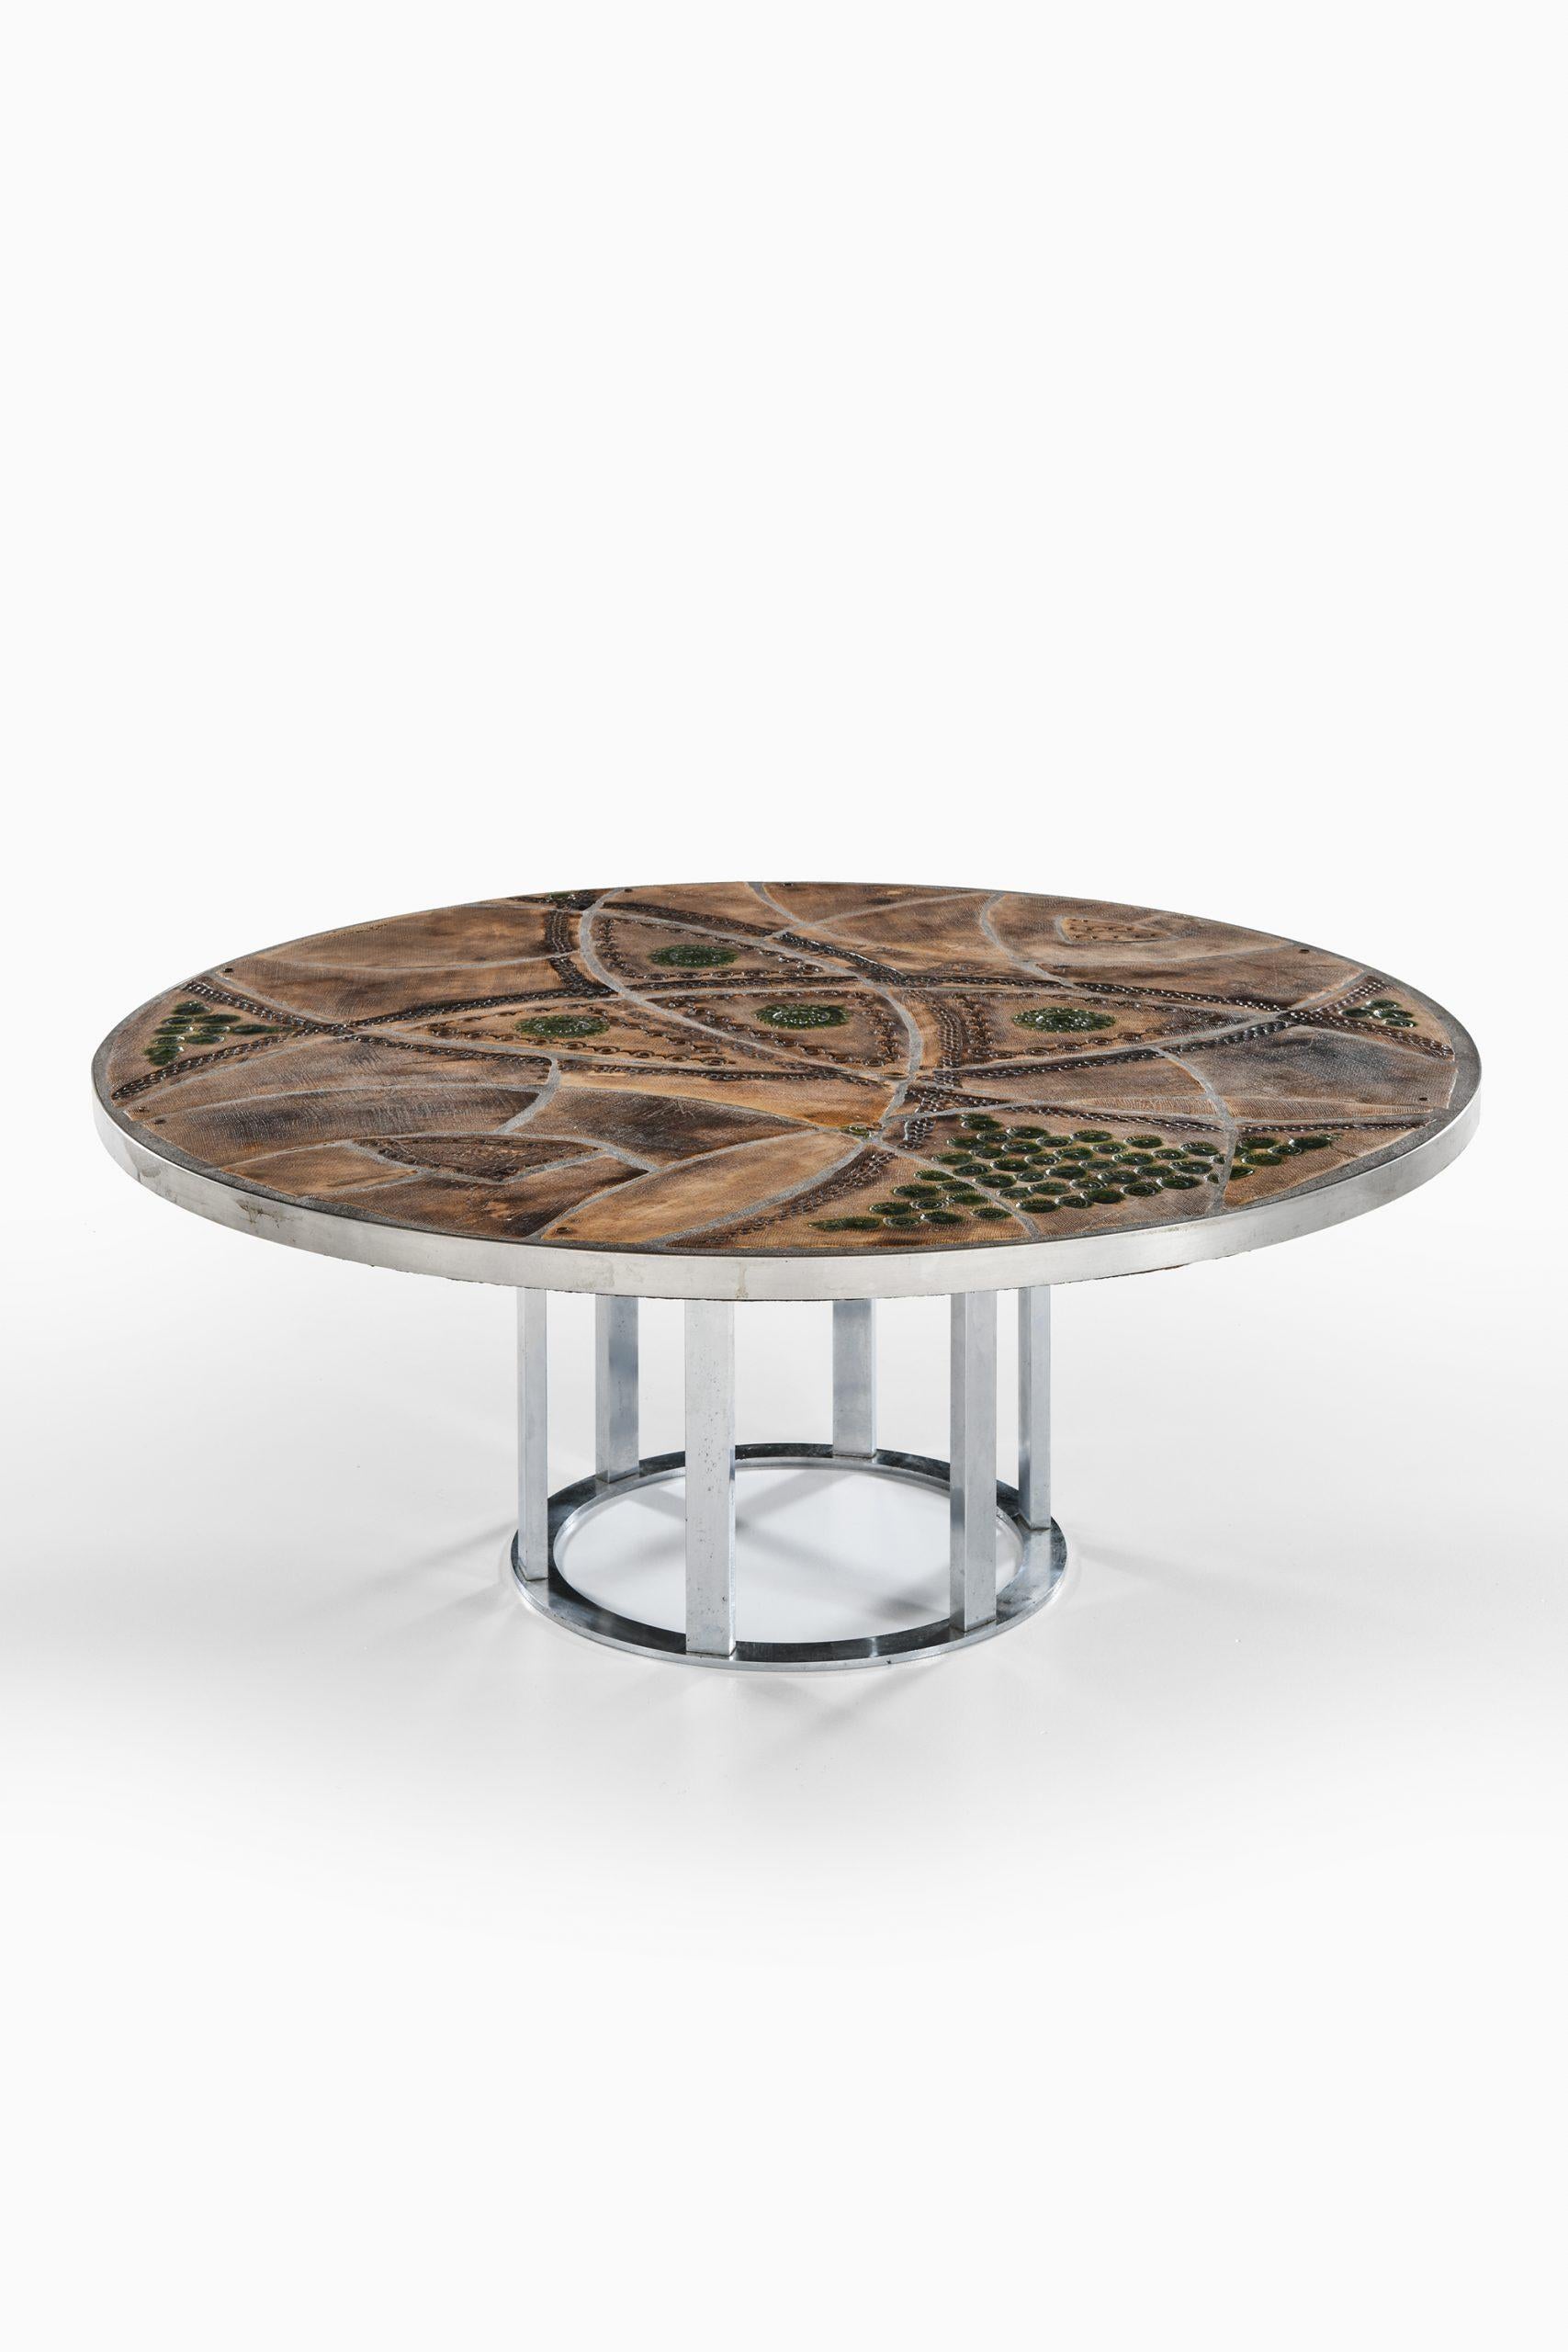 Danish Lilly Just Lichtenberg Coffee Table Produced in Denmark For Sale